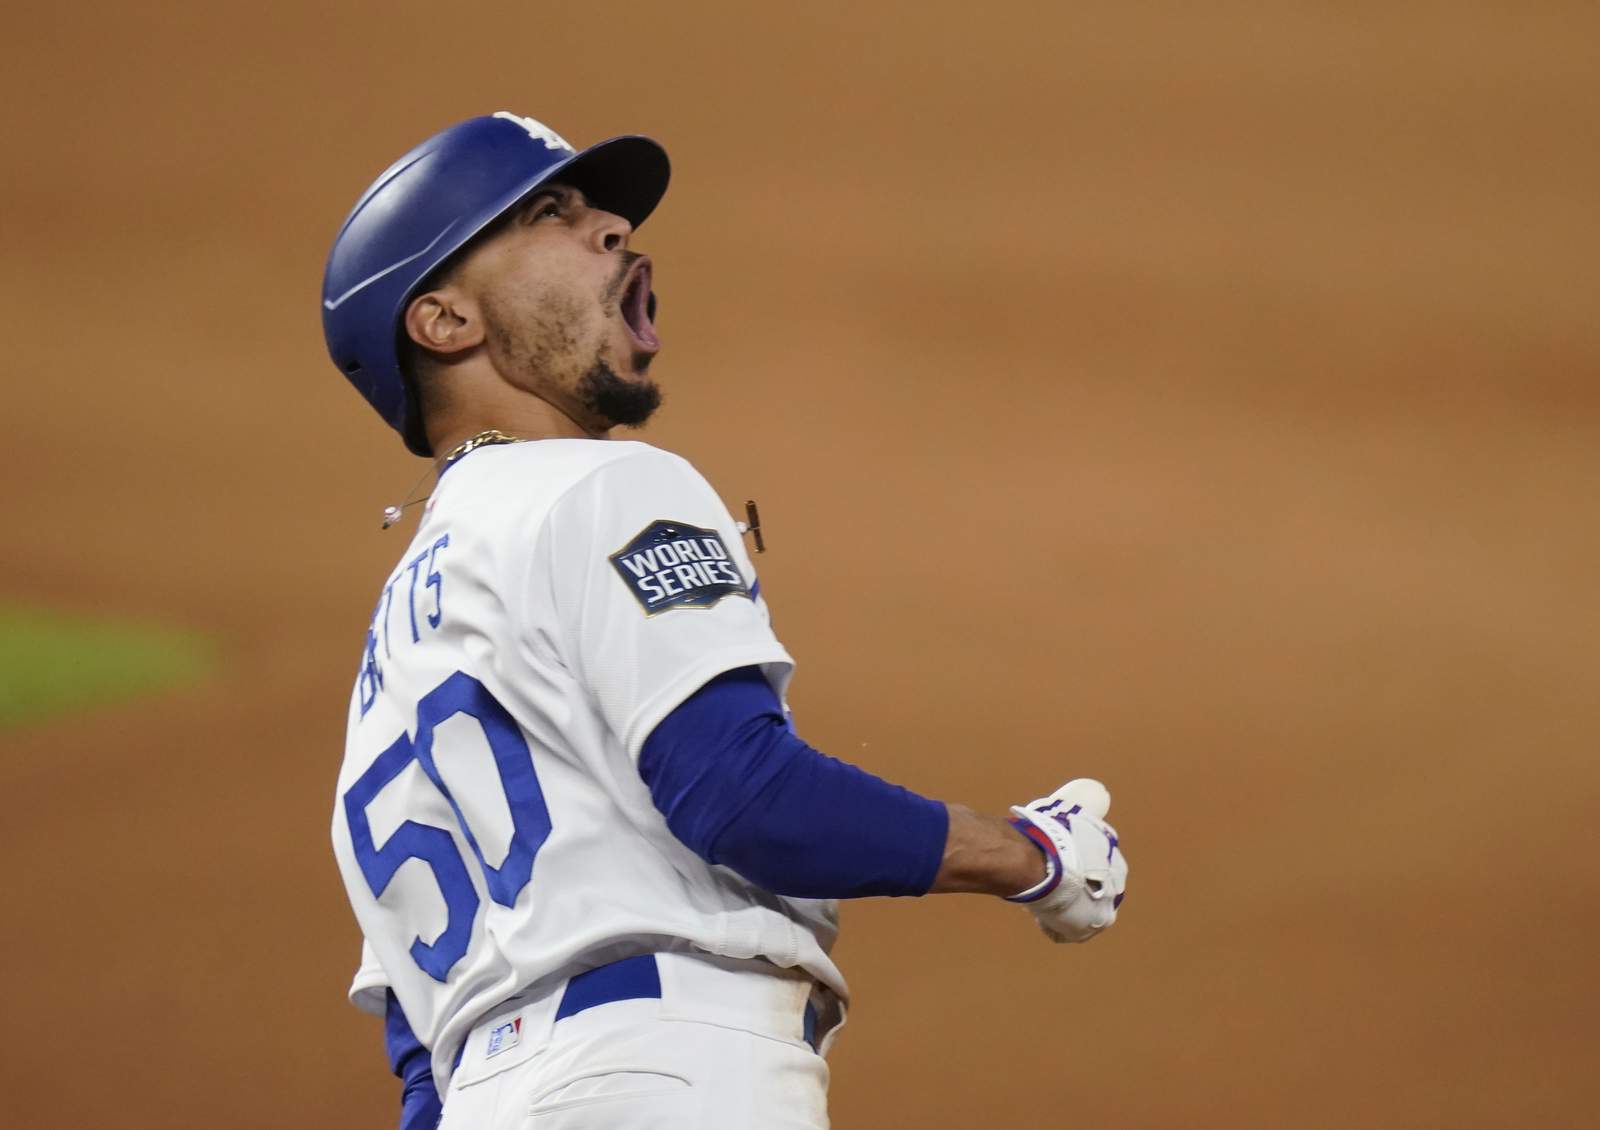 Los Angeles Dodgers win first World Series since 1988, beating Tampa Bay Rays in Game 6 to end pandemic-shortened season